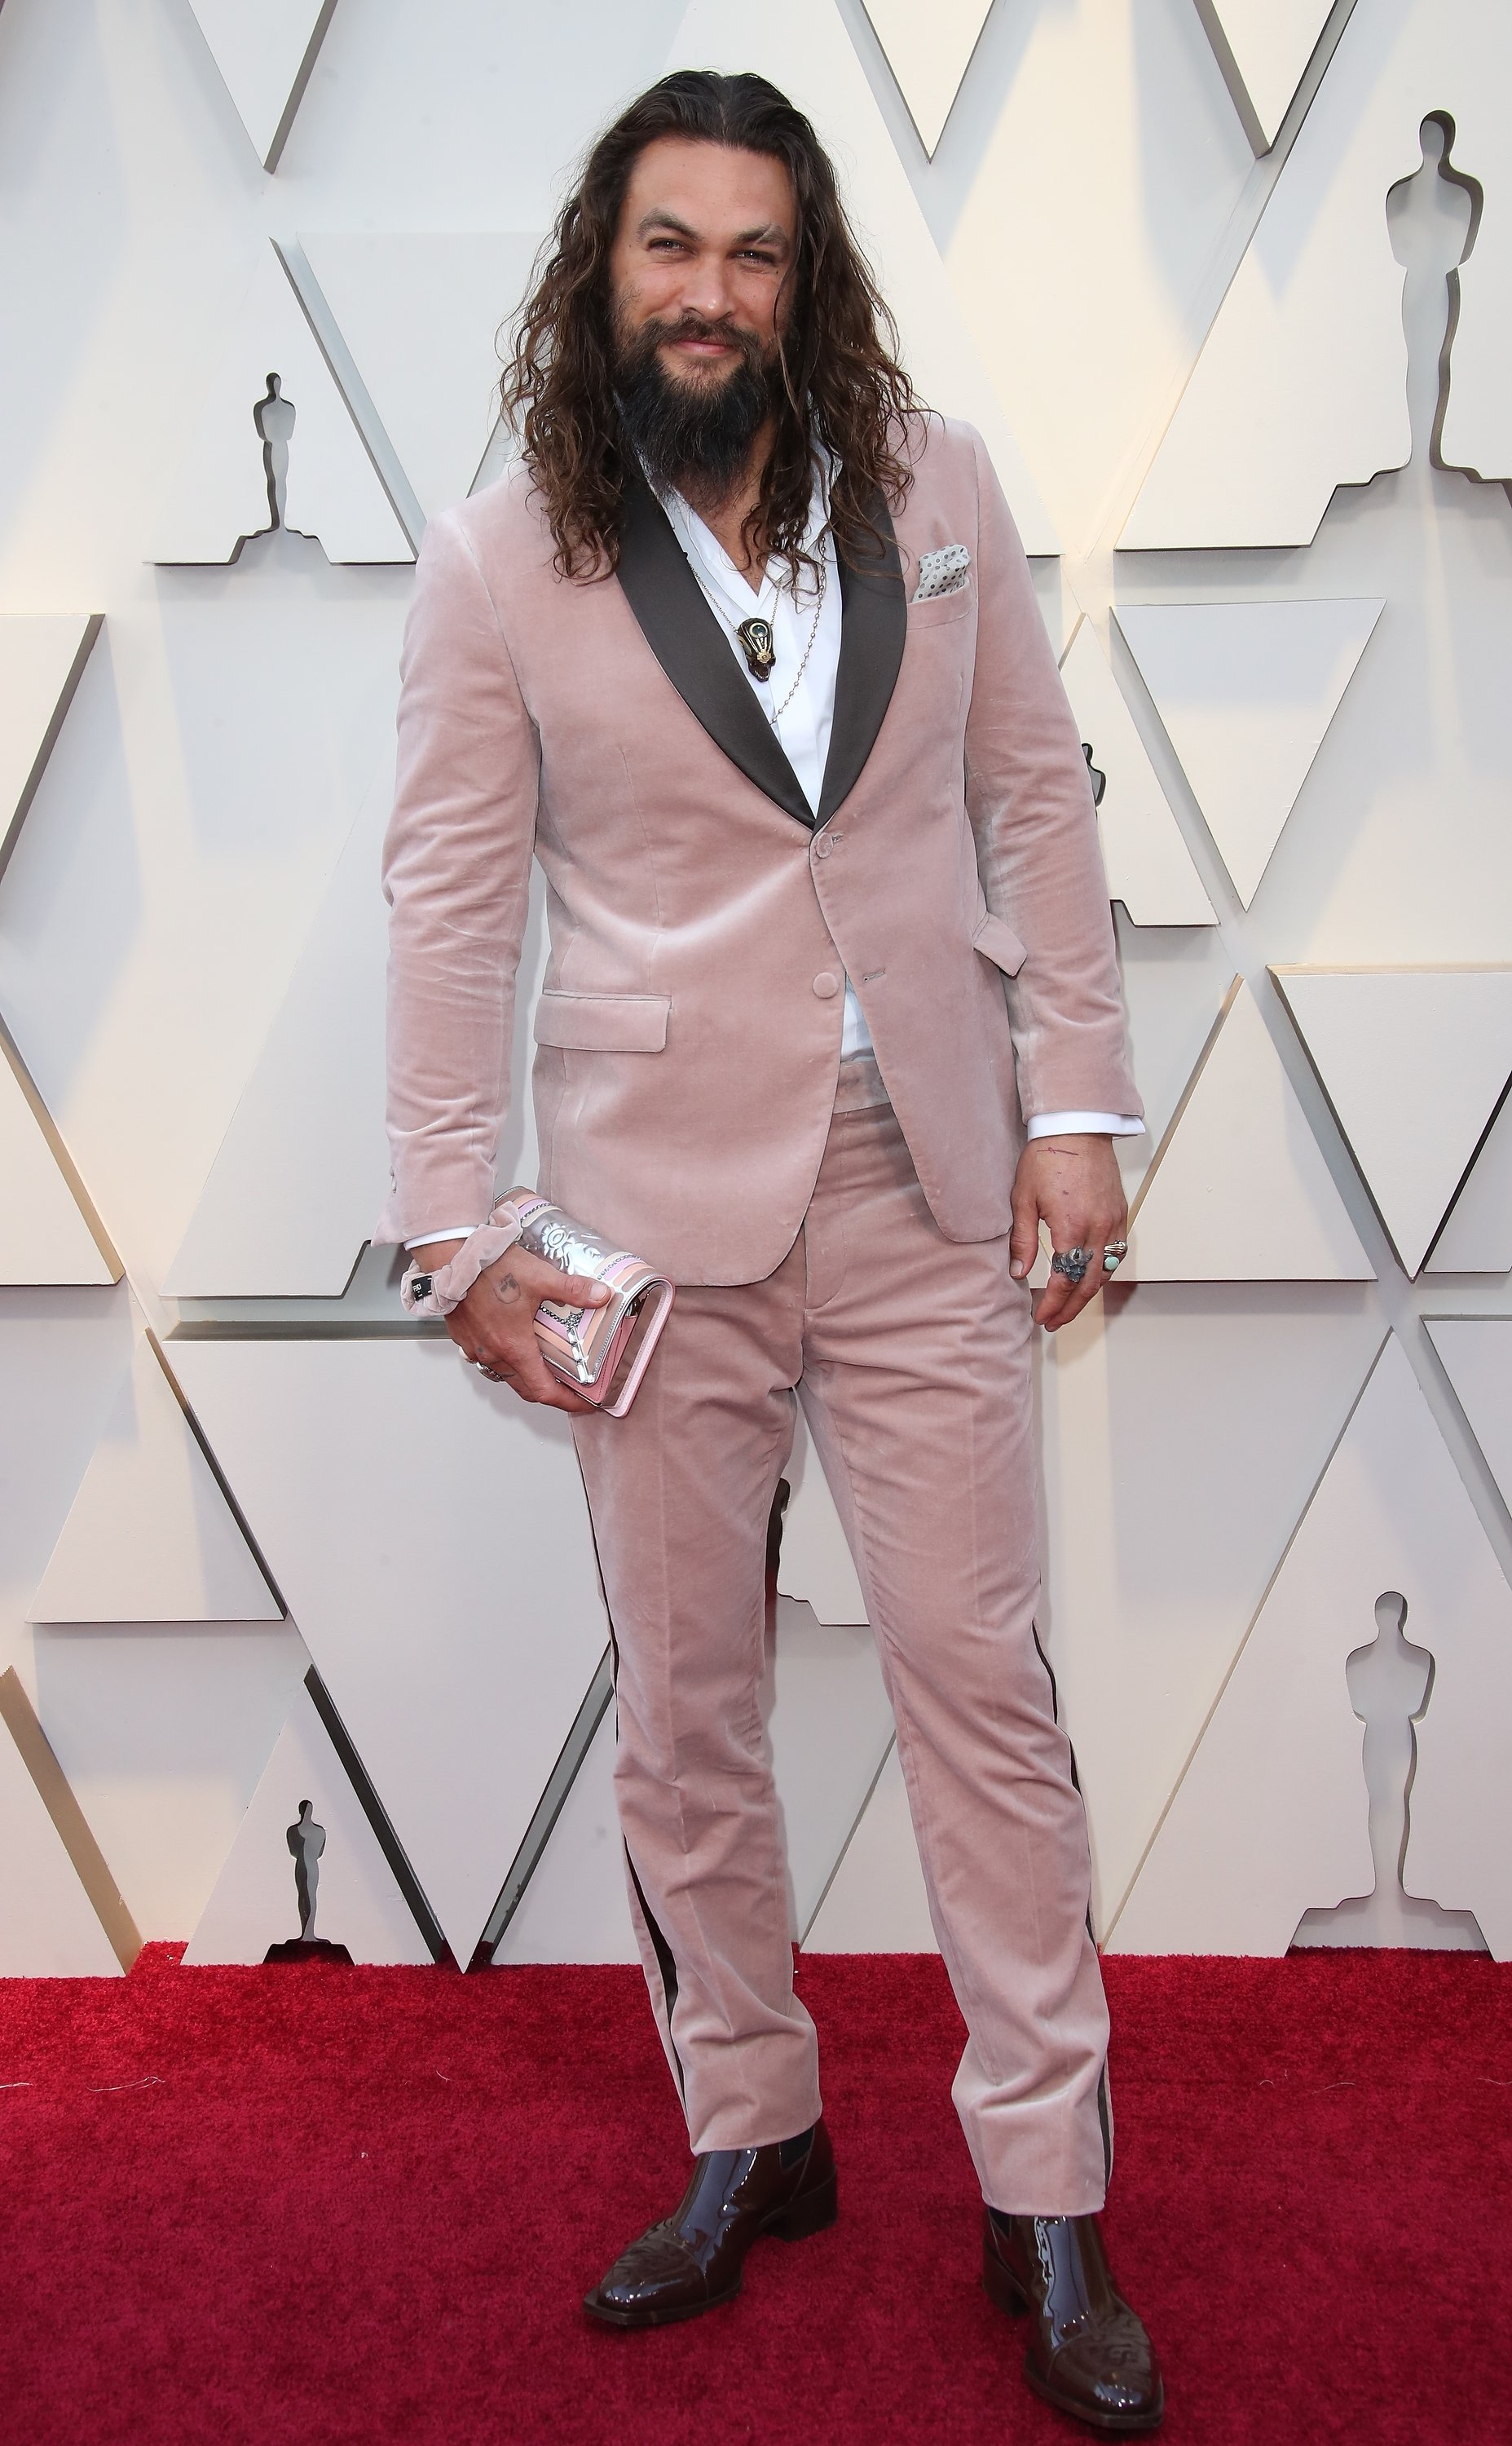 Jason Momoa attends the 2019 Oscars | Photo: Getty Images